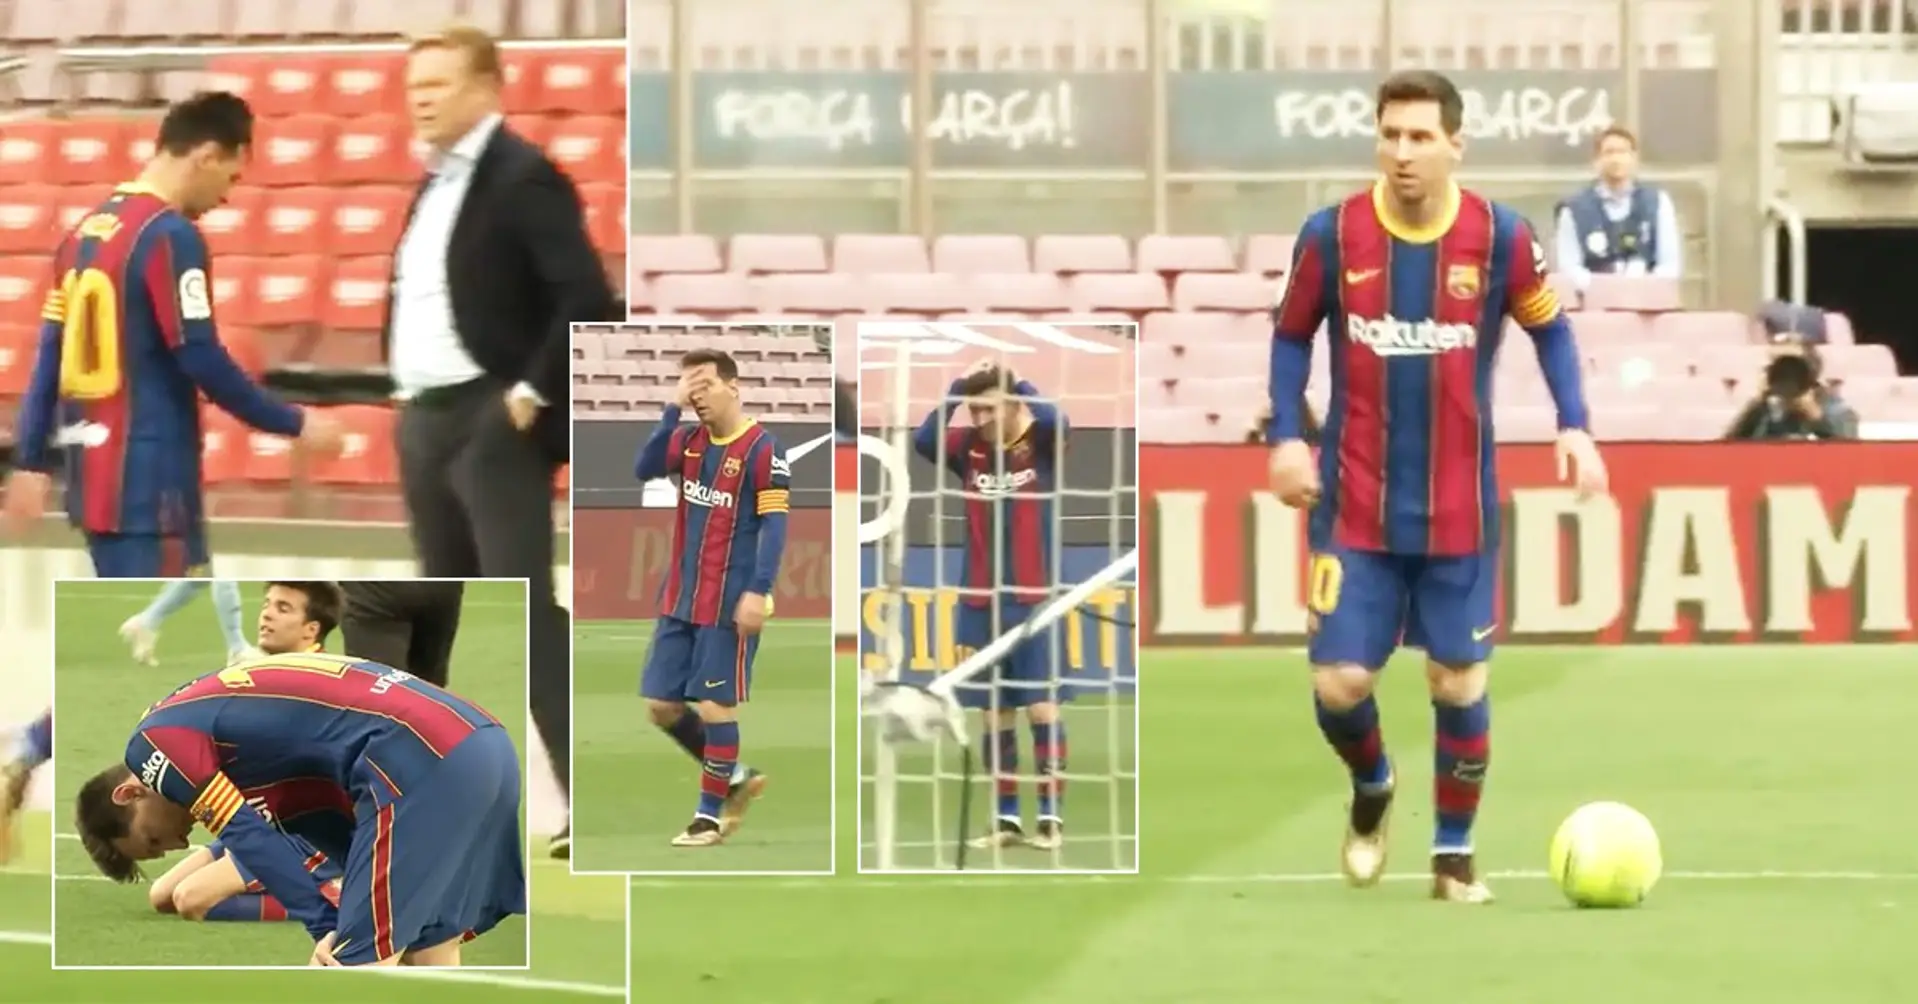 ‘It killed him inside’. Unseen footage of Leo Messi’s reaction to Barca’s crucial loss has been published